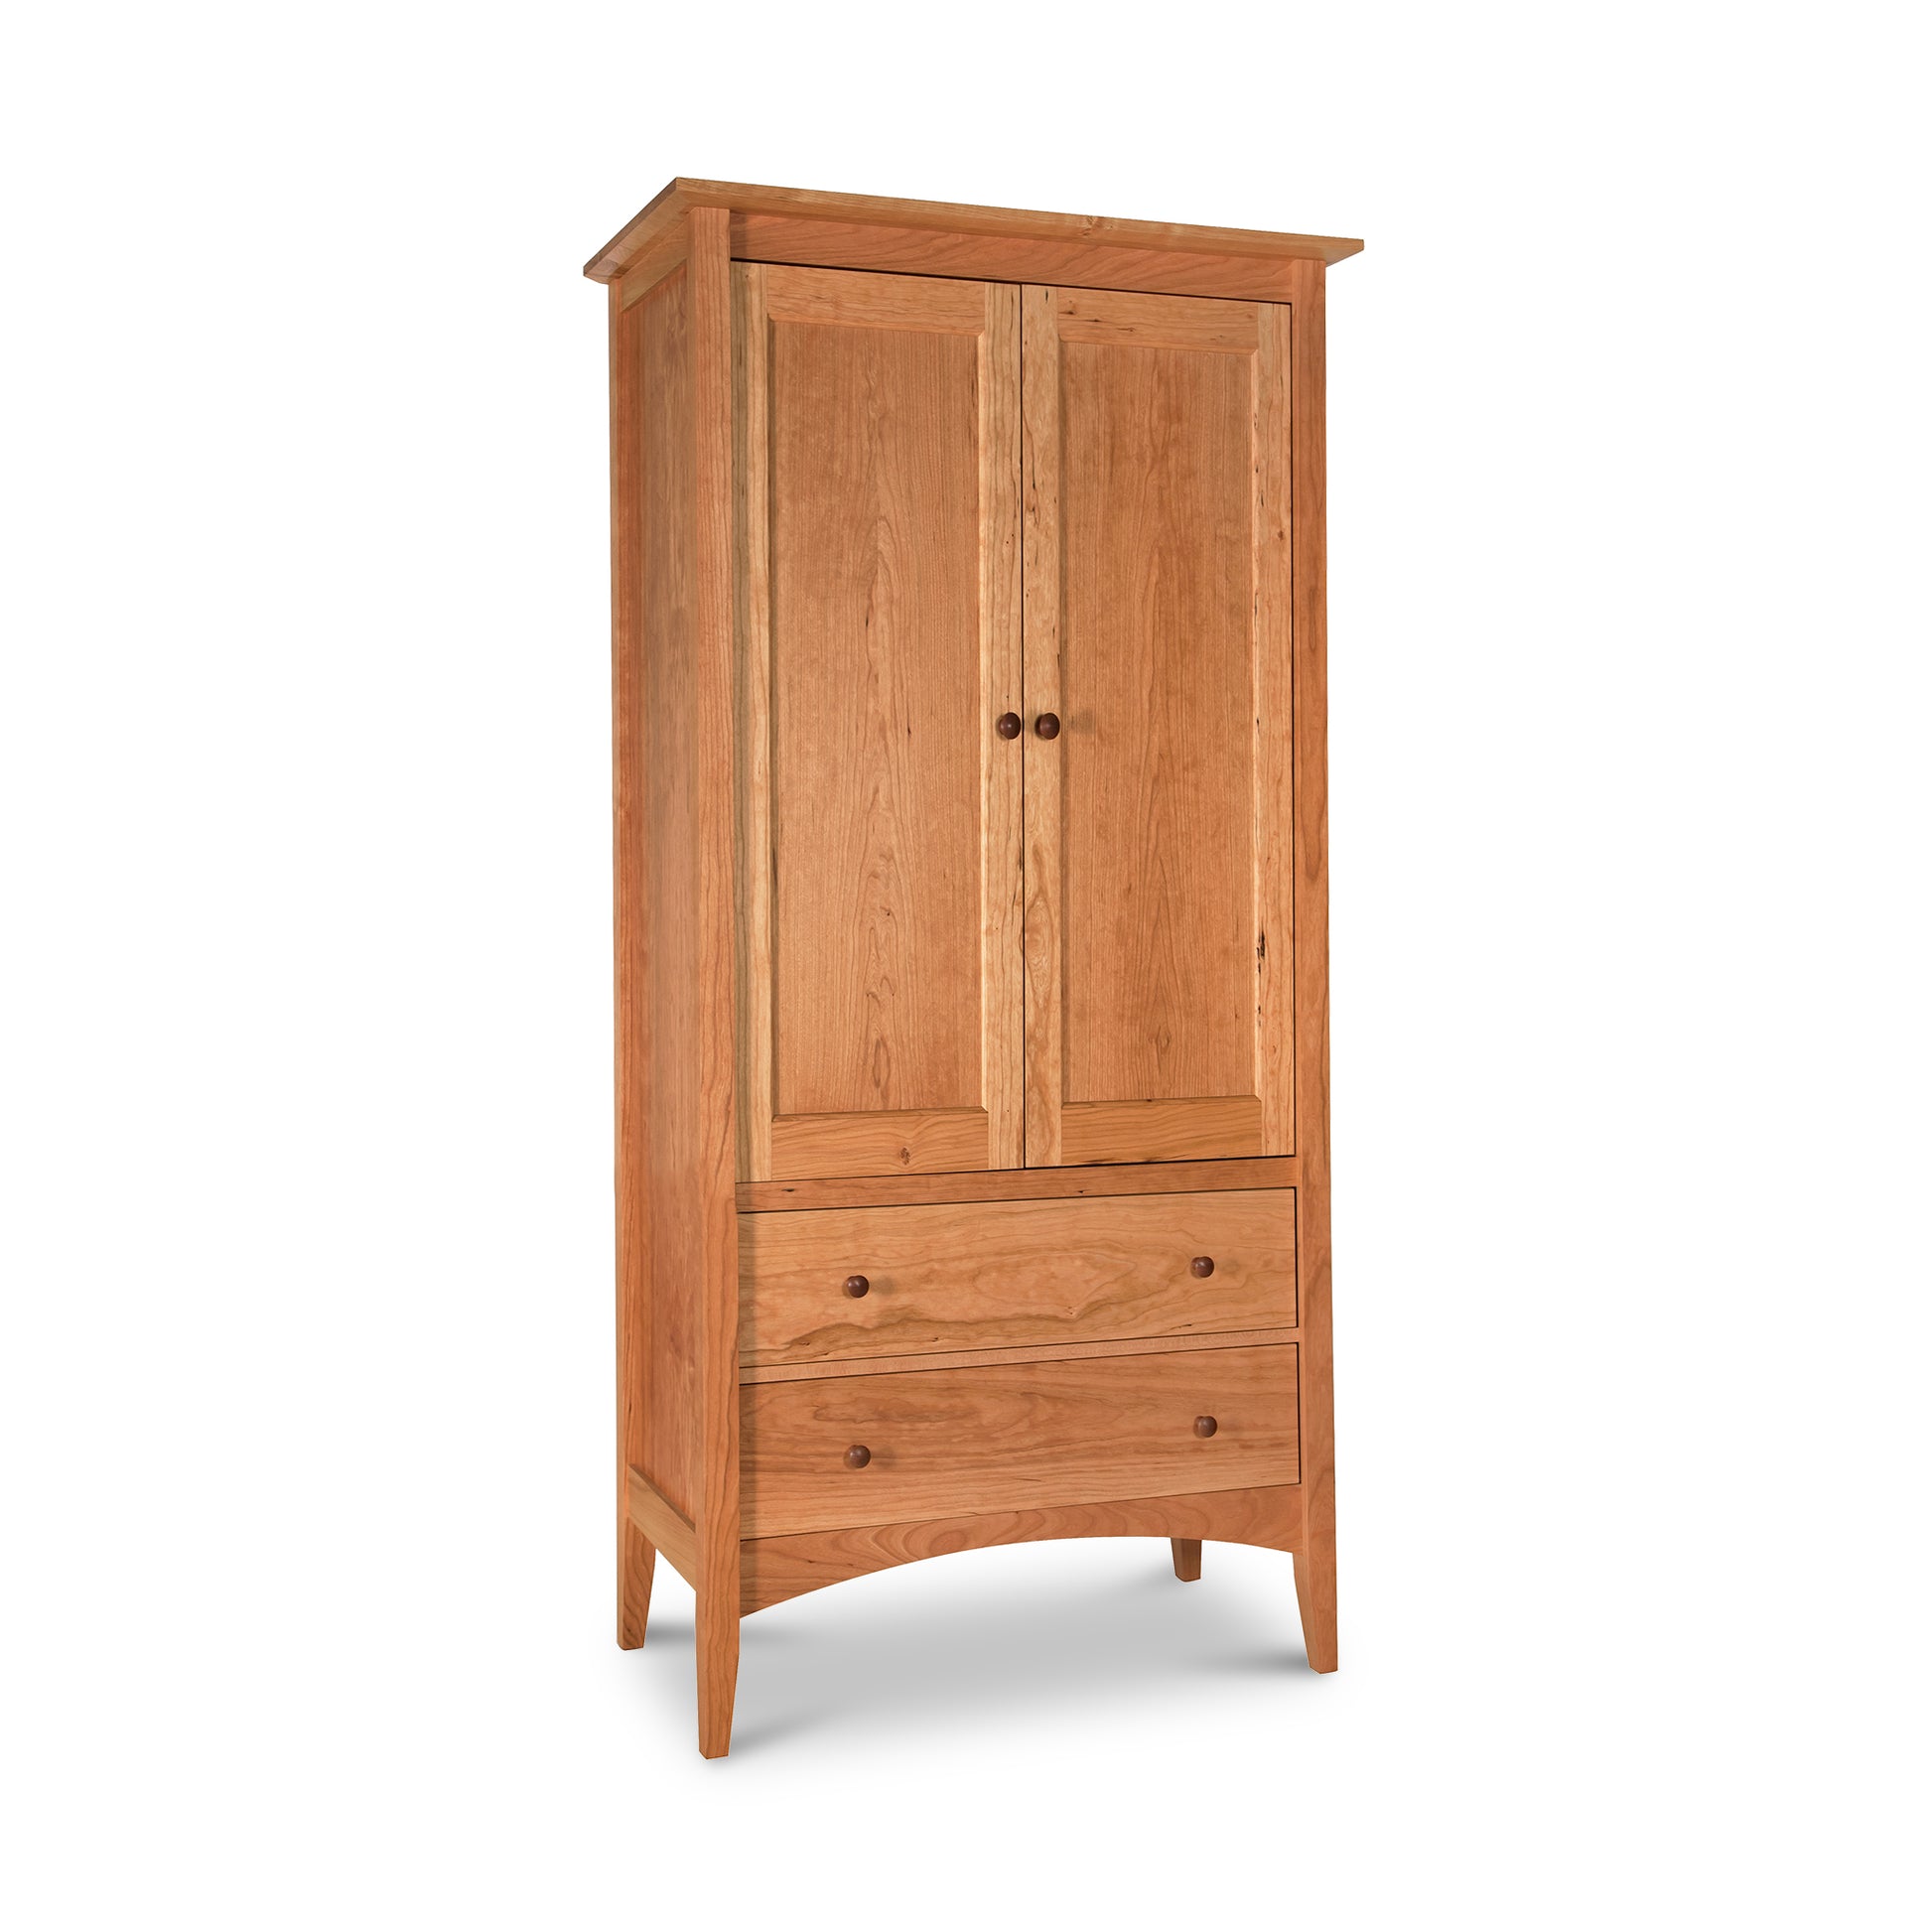 Maple Corner Woodworks' American Shaker Armoire, an heirloom quality wooden armoire with two doors above and two drawers below, set against a white background. The furniture has a natural finish and vertical wood grain texture.